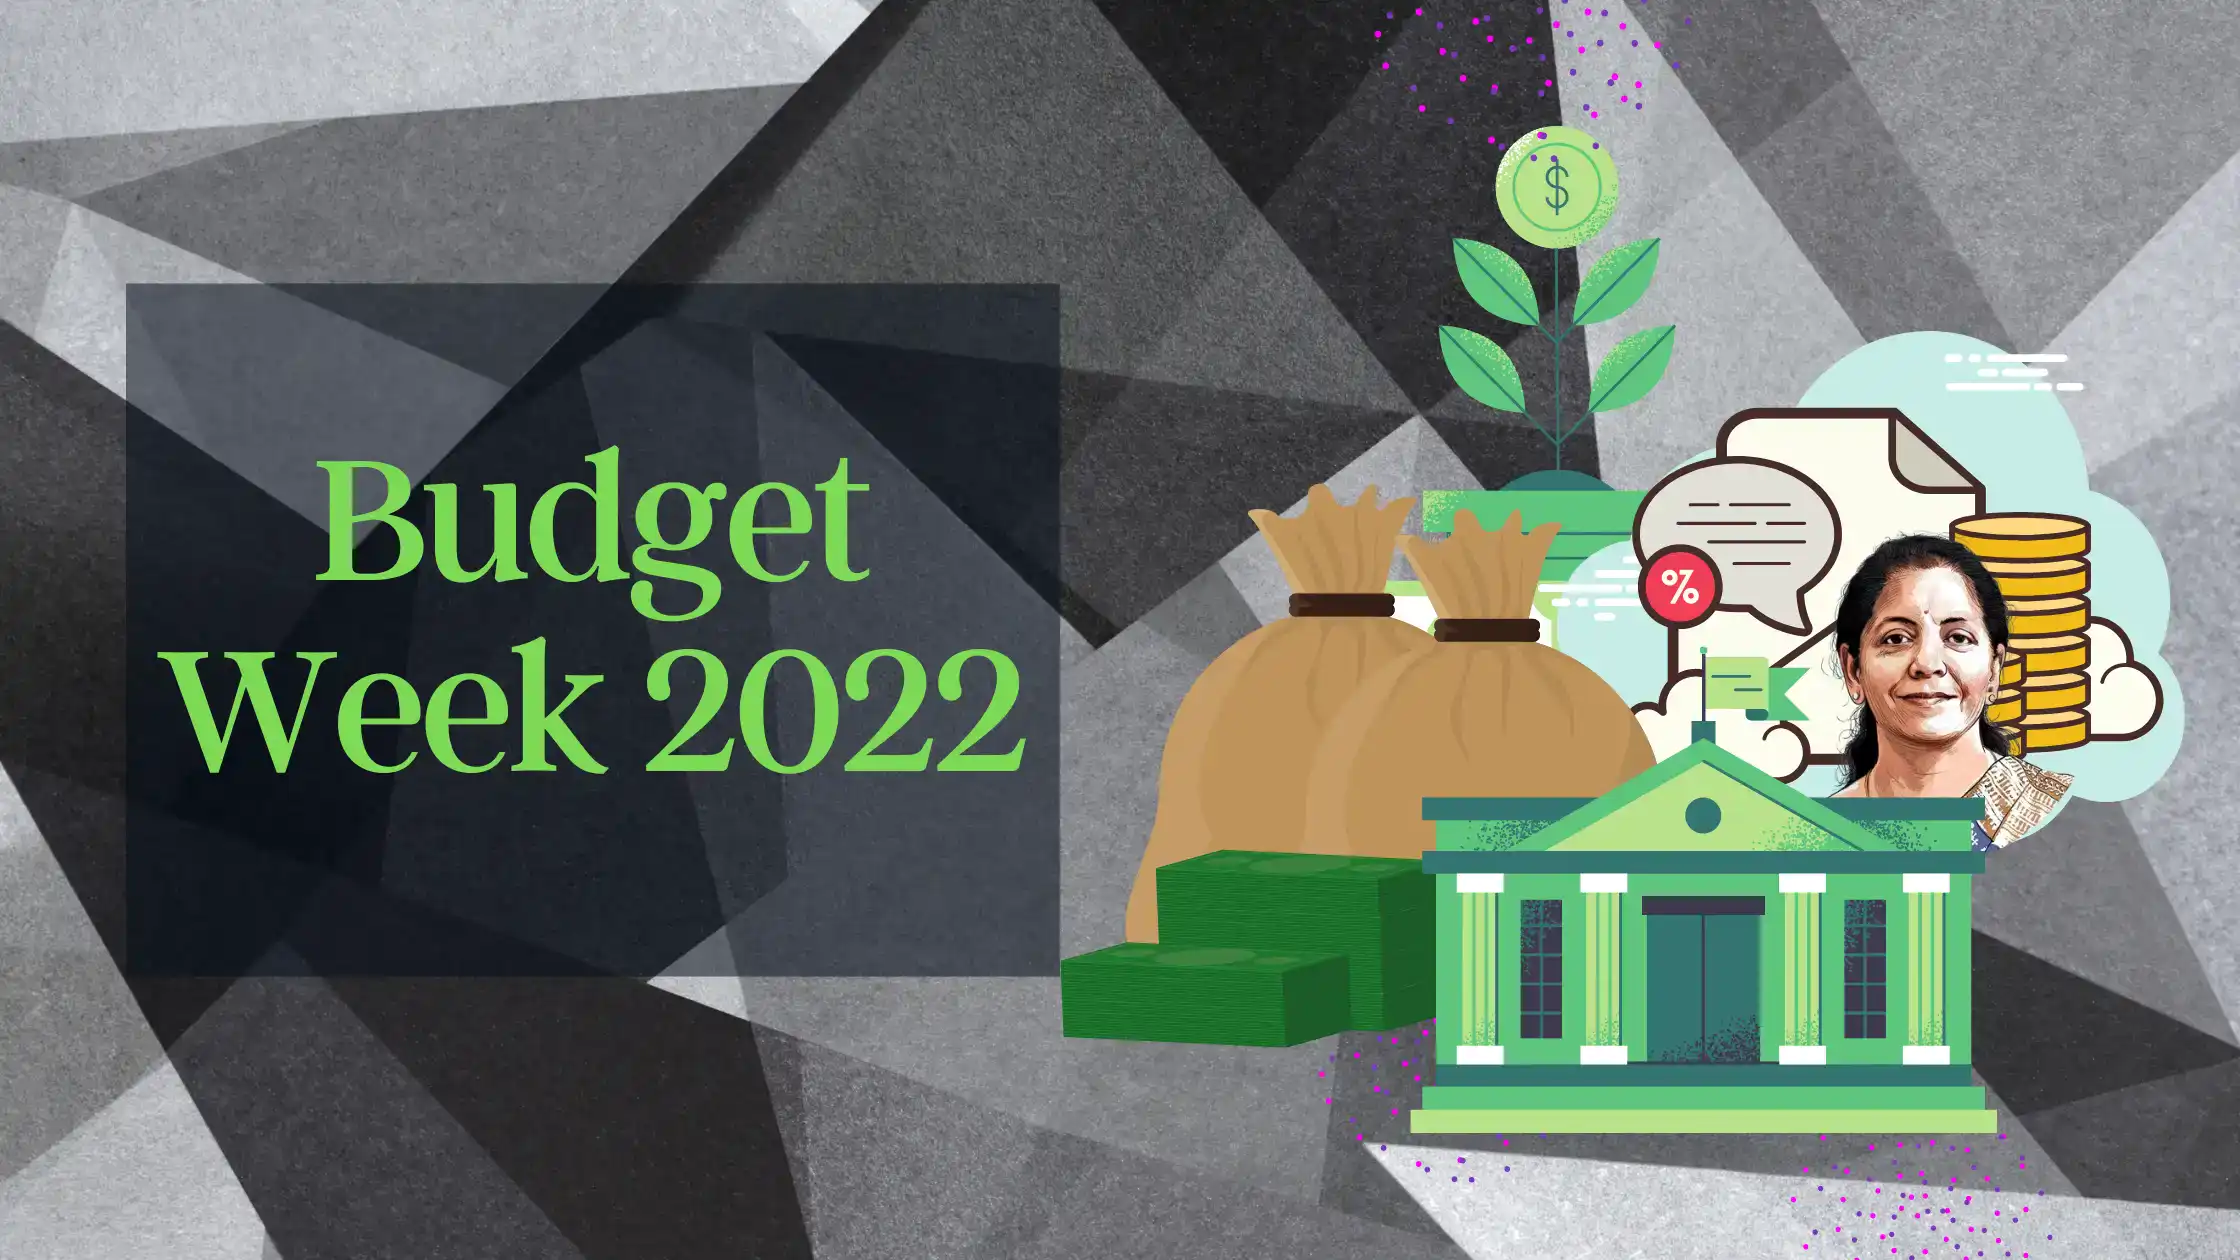 What to expect in the run-up to the Budget?